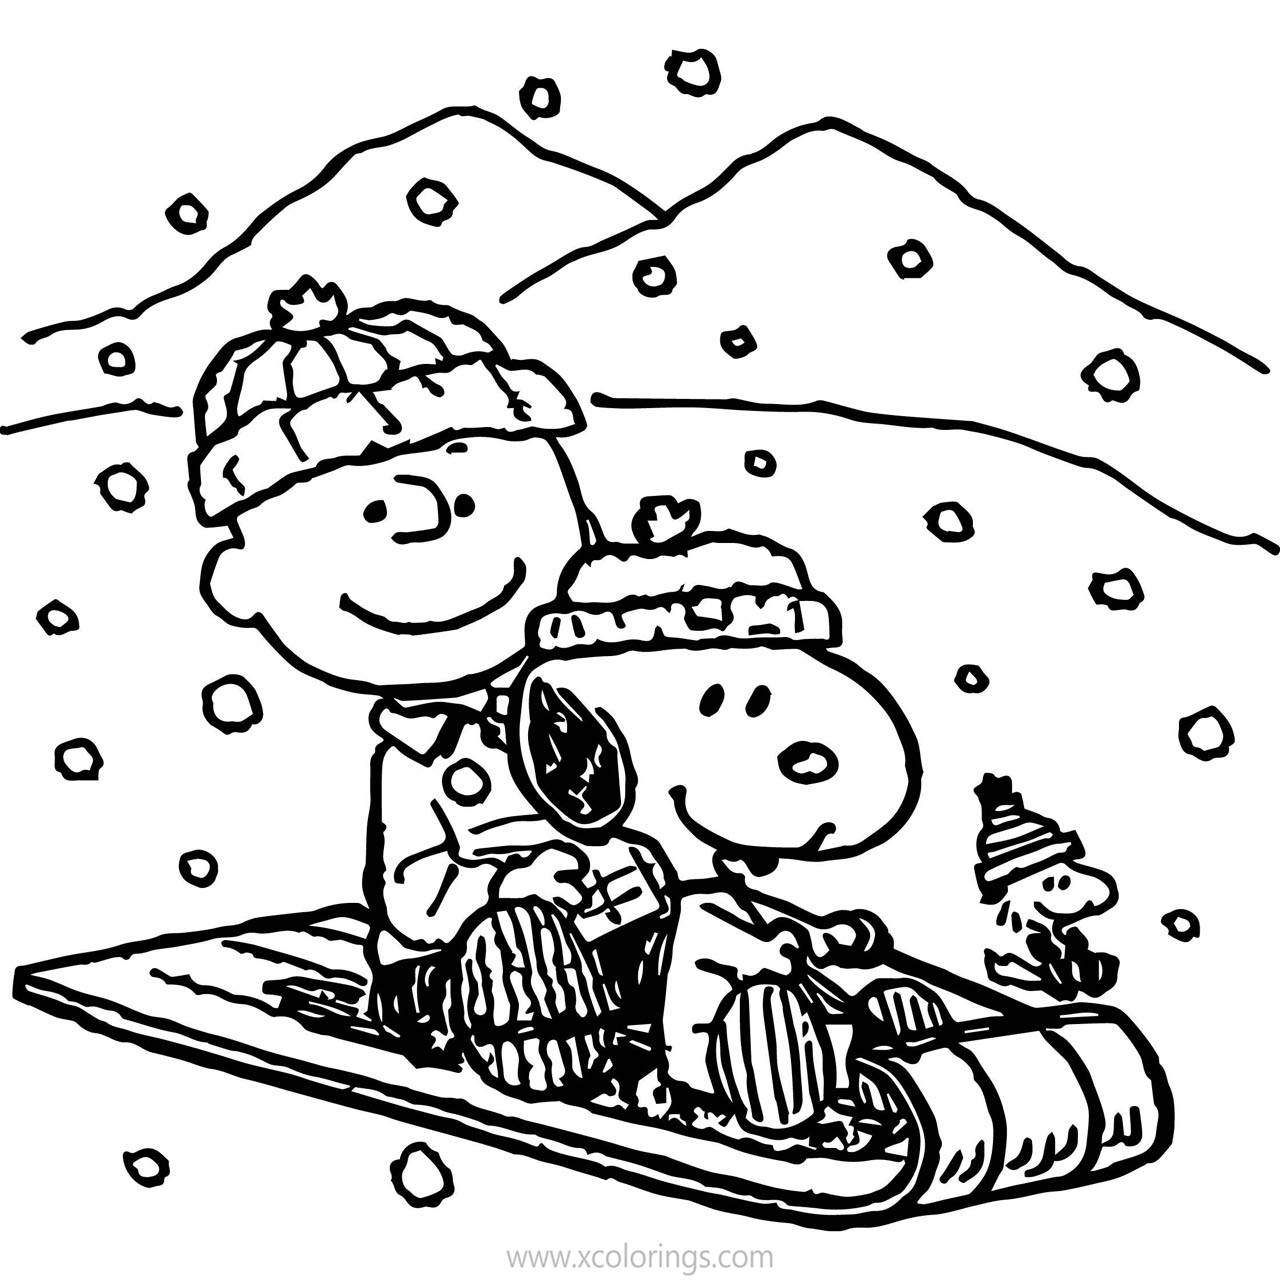 Free Charlie Brown Christmas Coloring Pages Sledding with Snoopy printable